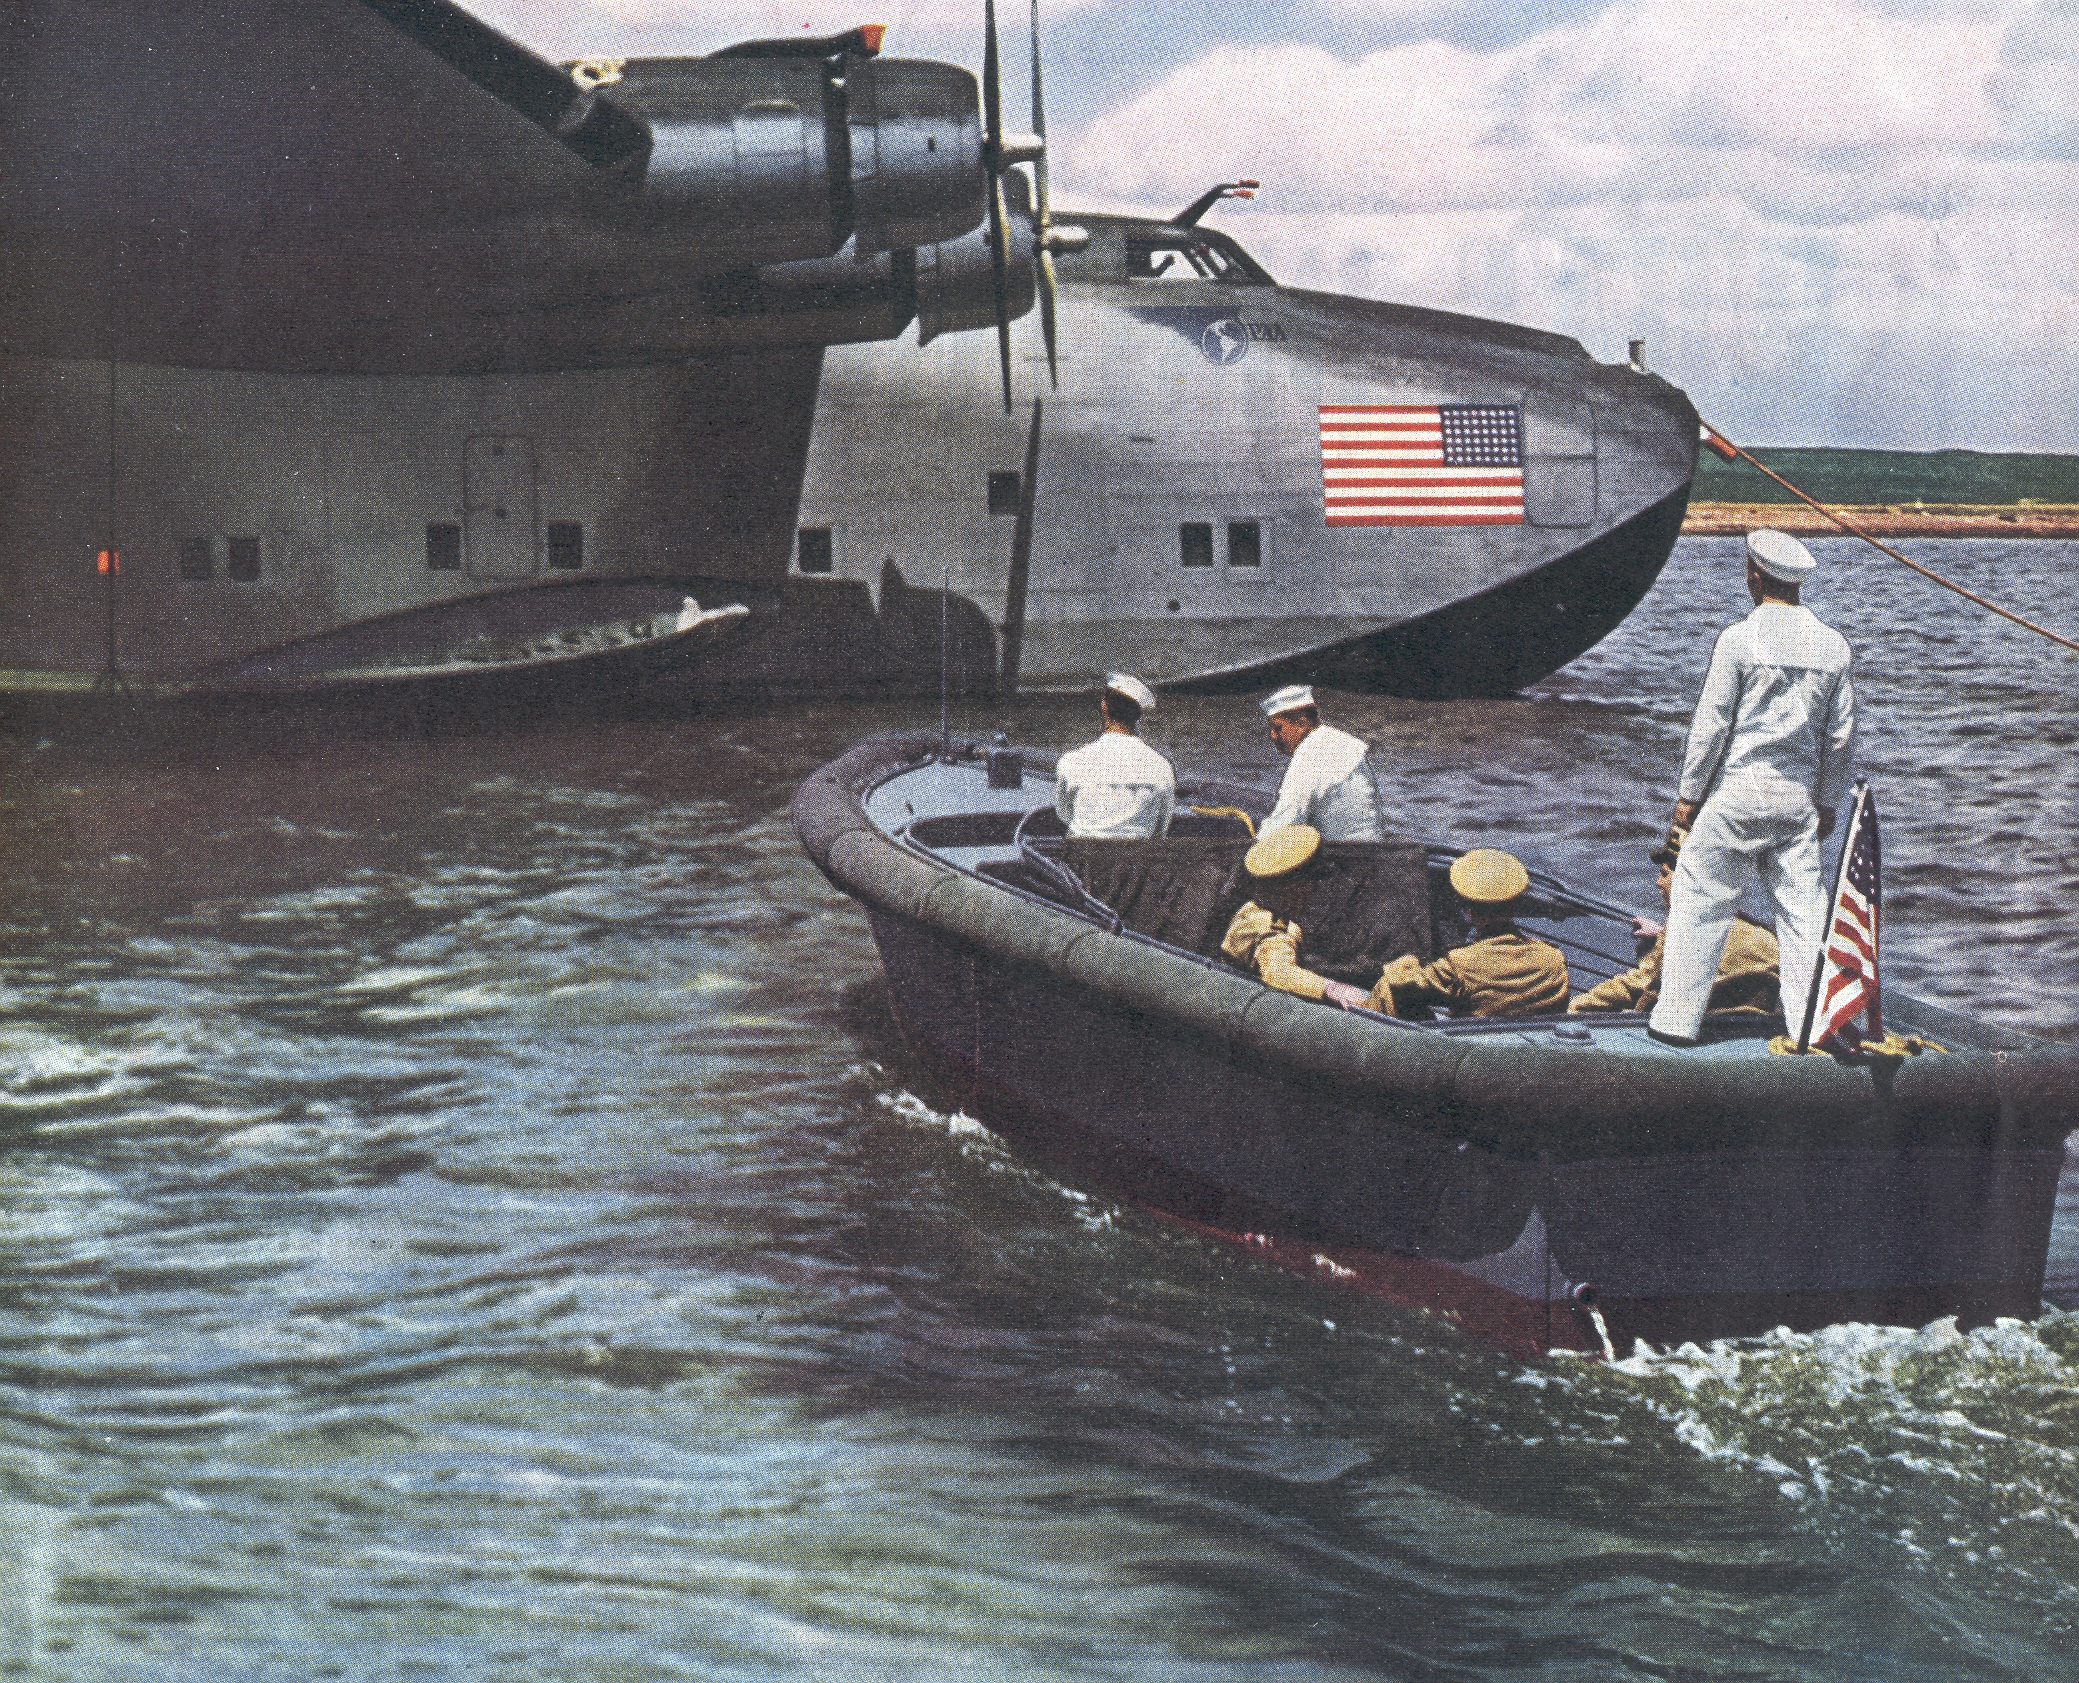 1940s  Navy Launch approaching a moored Boeing B314.  During World War II Pan Am's entire B314 fleet was operated on behalf of the United States Navy moving critical personell and supplies around the world.